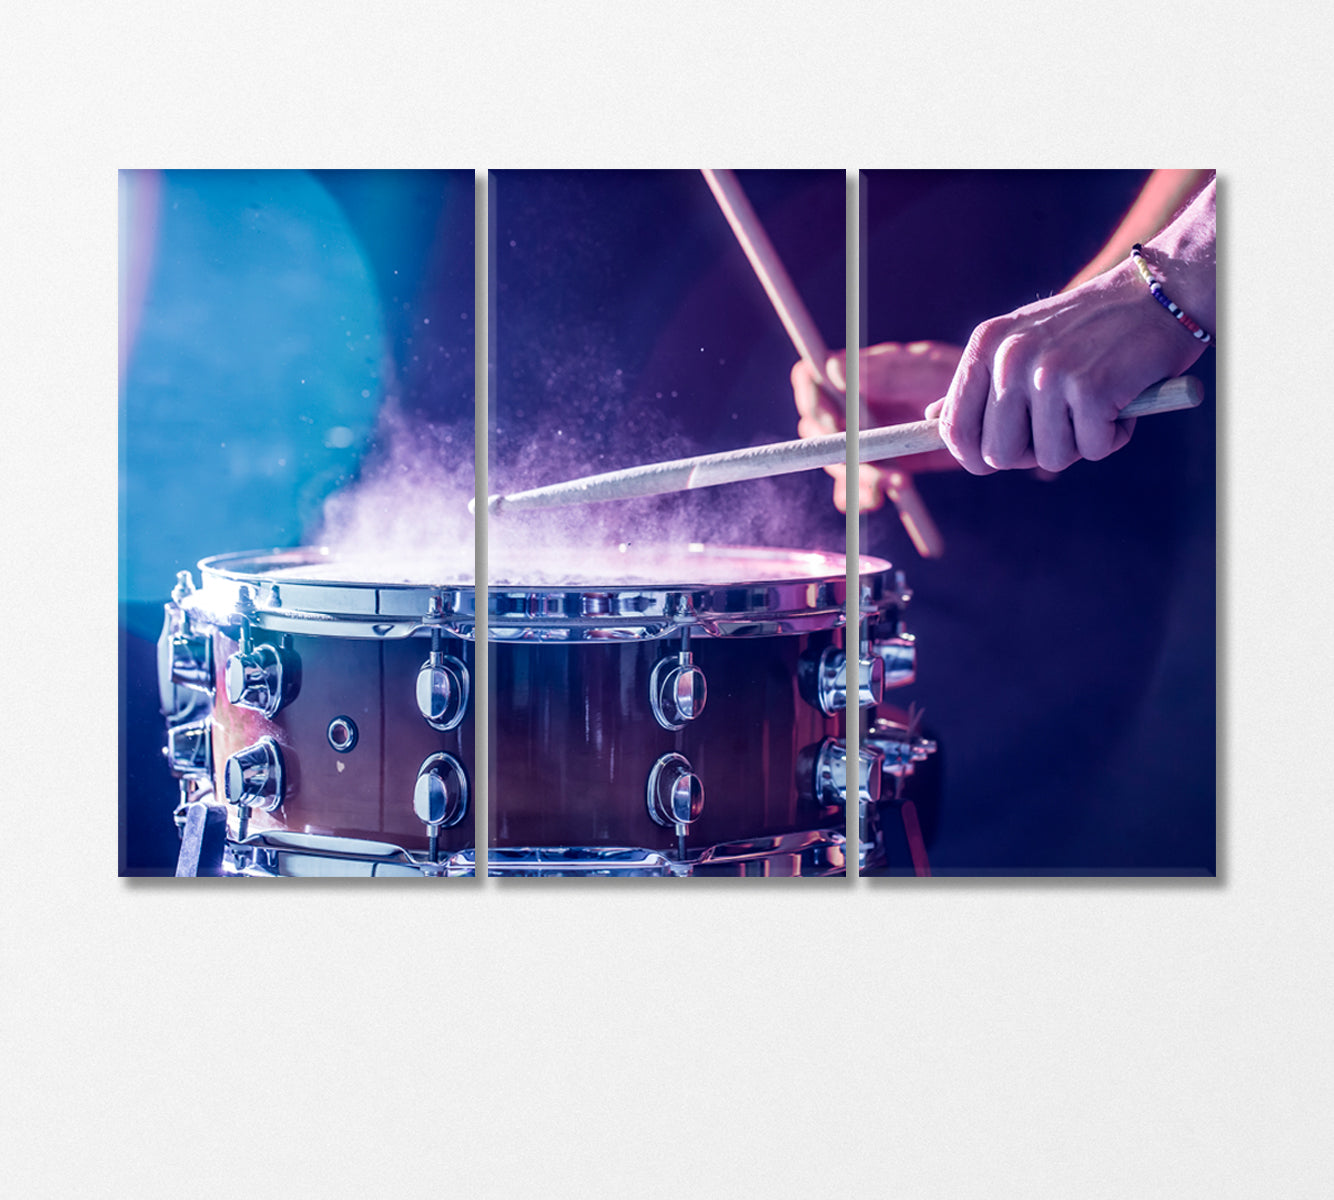 Close Up of Drummer's Hands While Playing Drums Canvas Print-Canvas Print-CetArt-3 Panels-36x24 inches-CetArt